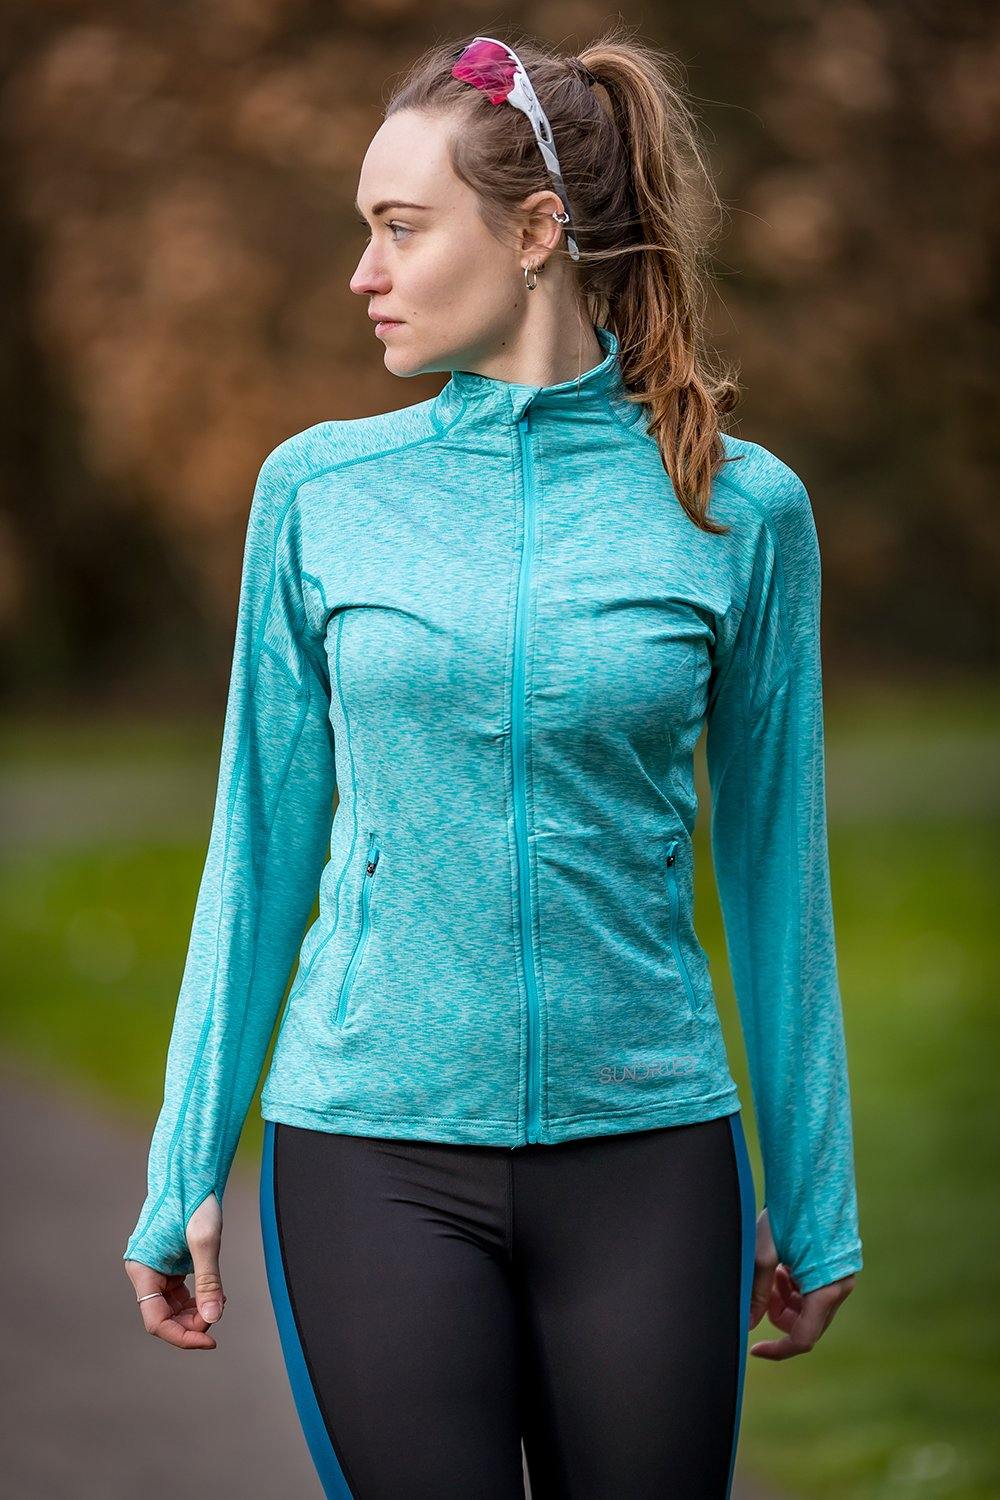 Sundried Pace Women's Long Sleeve Top Jackets Activewear